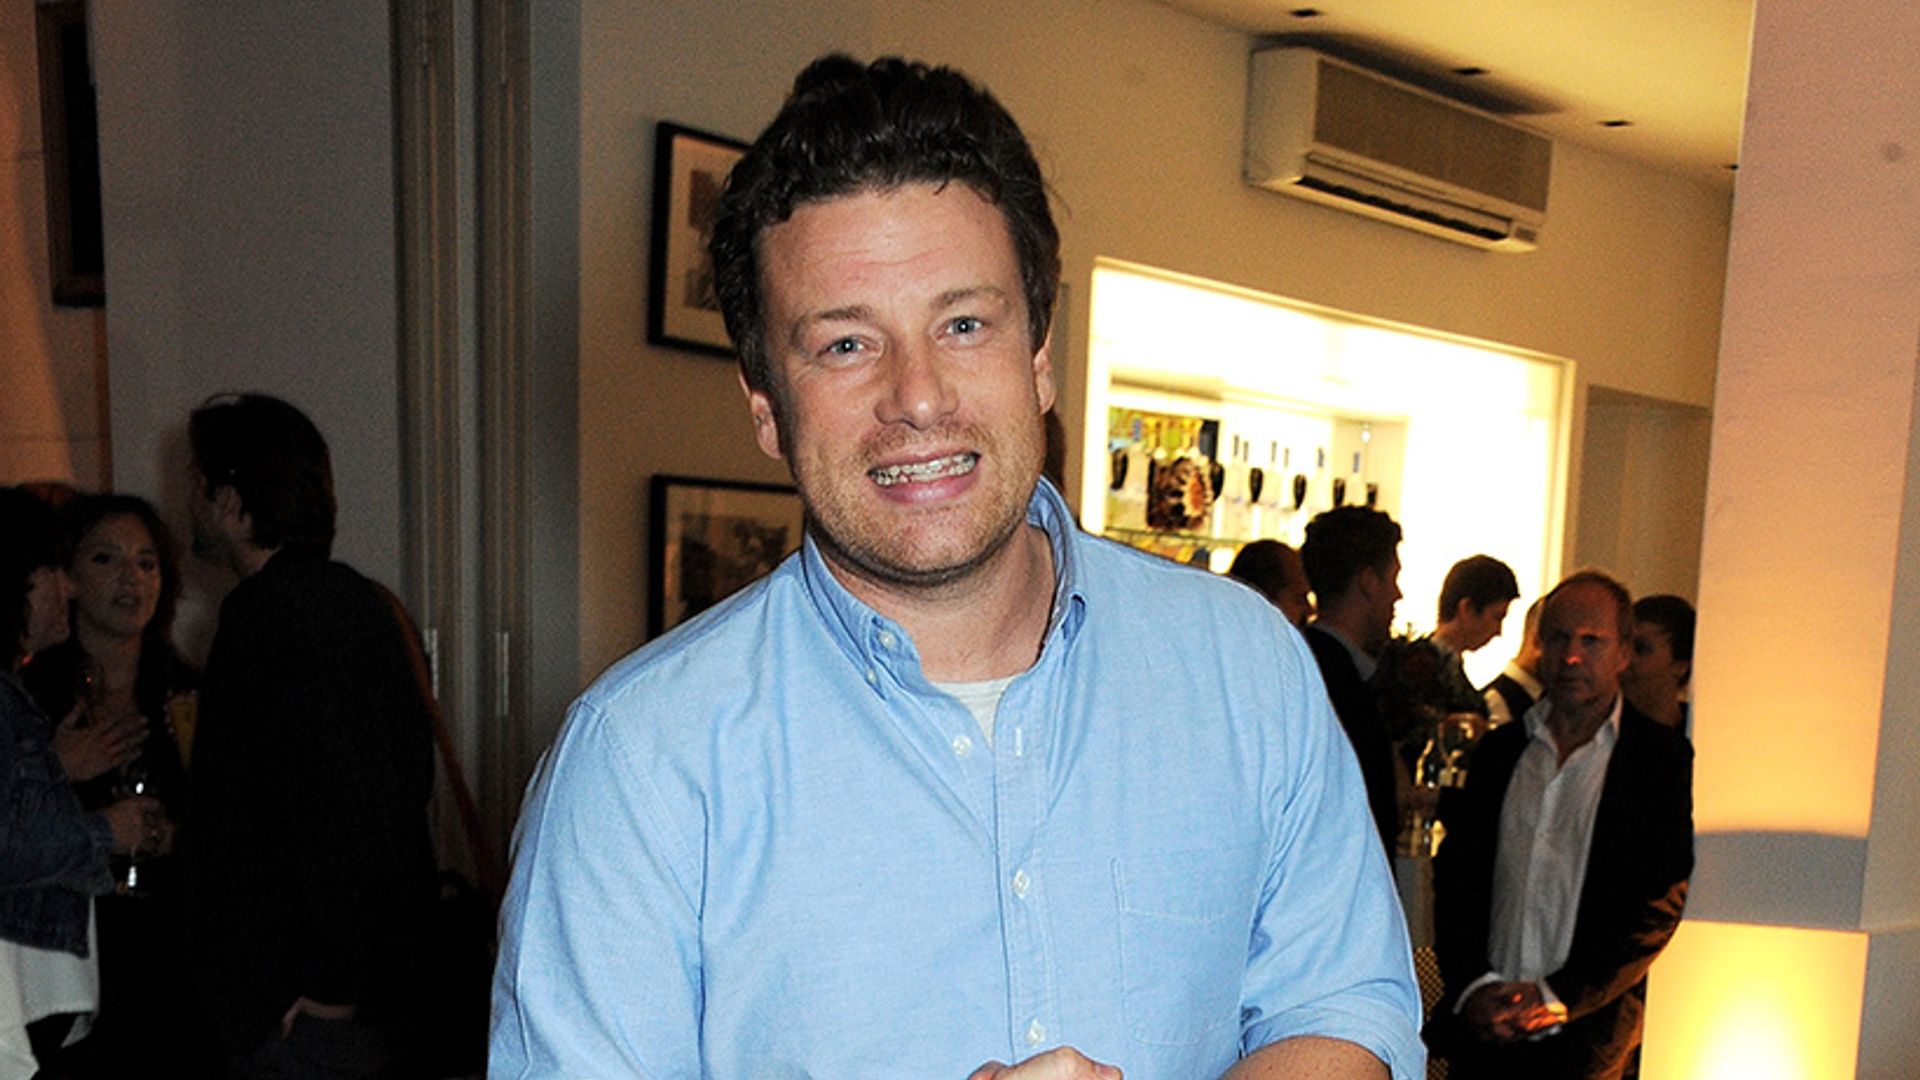 Jamie Oliver welcomes some special royal guests to his London restaurant